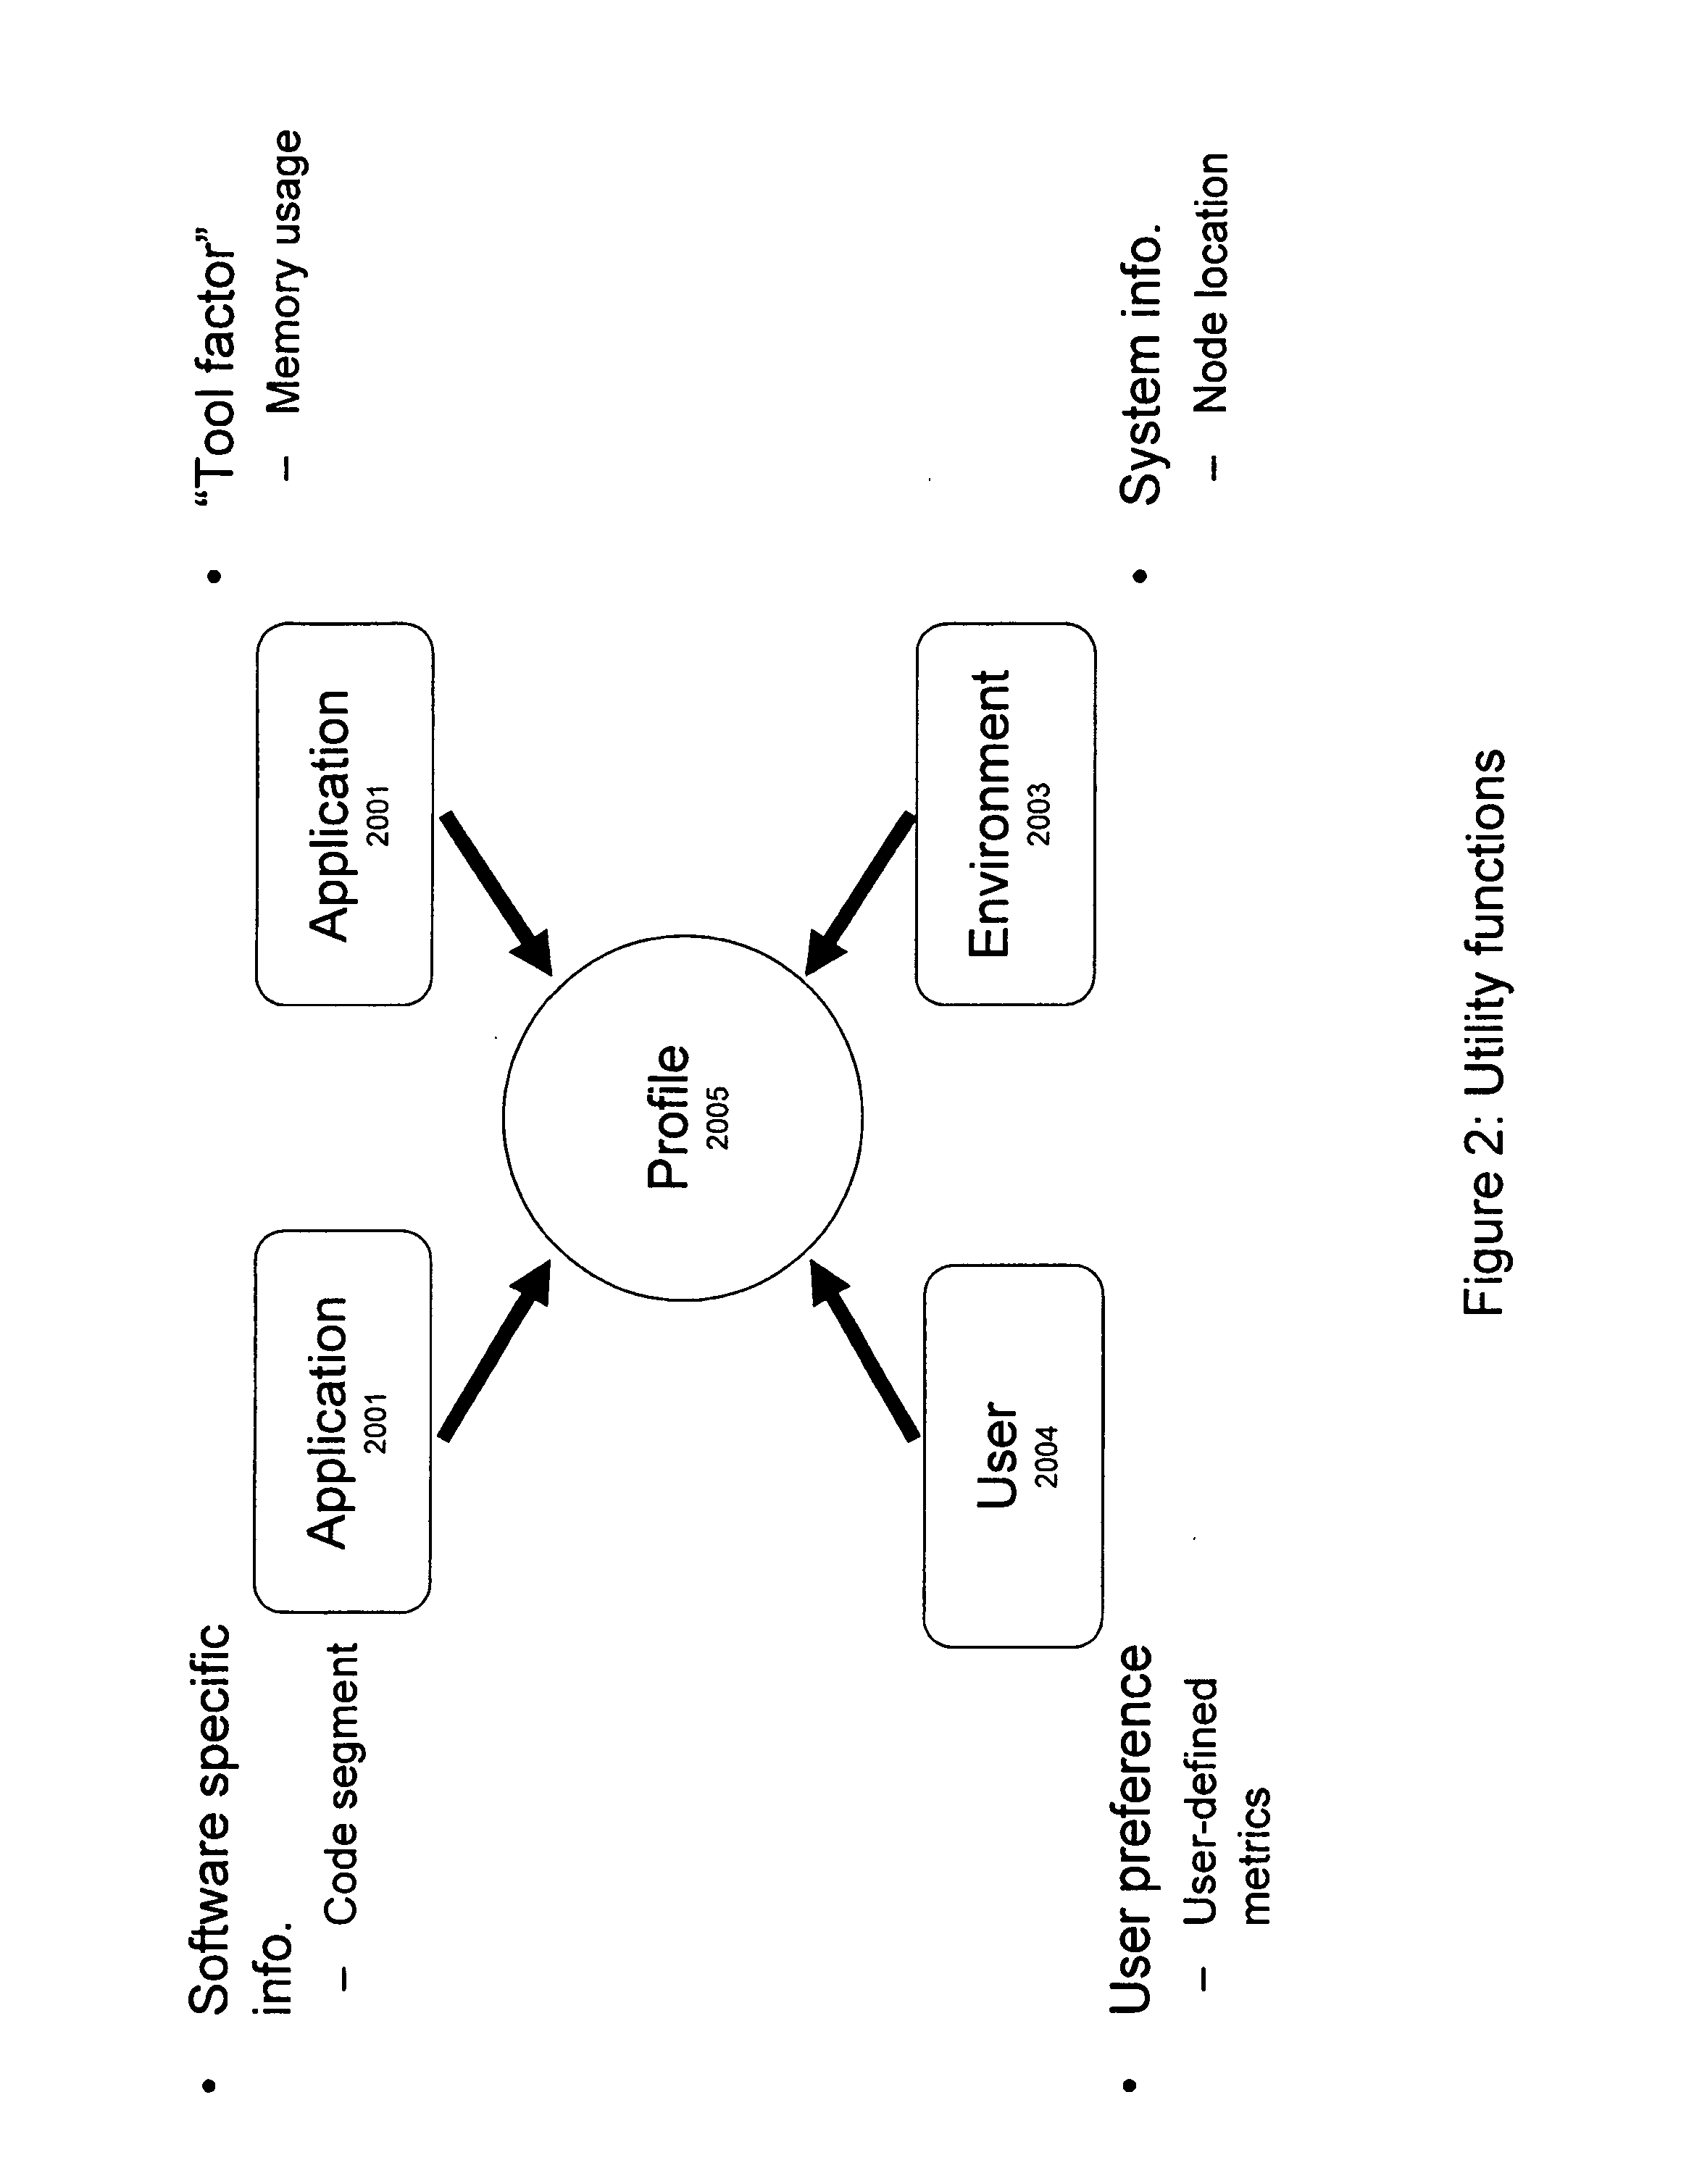 Binary programmable method for application performance data collection